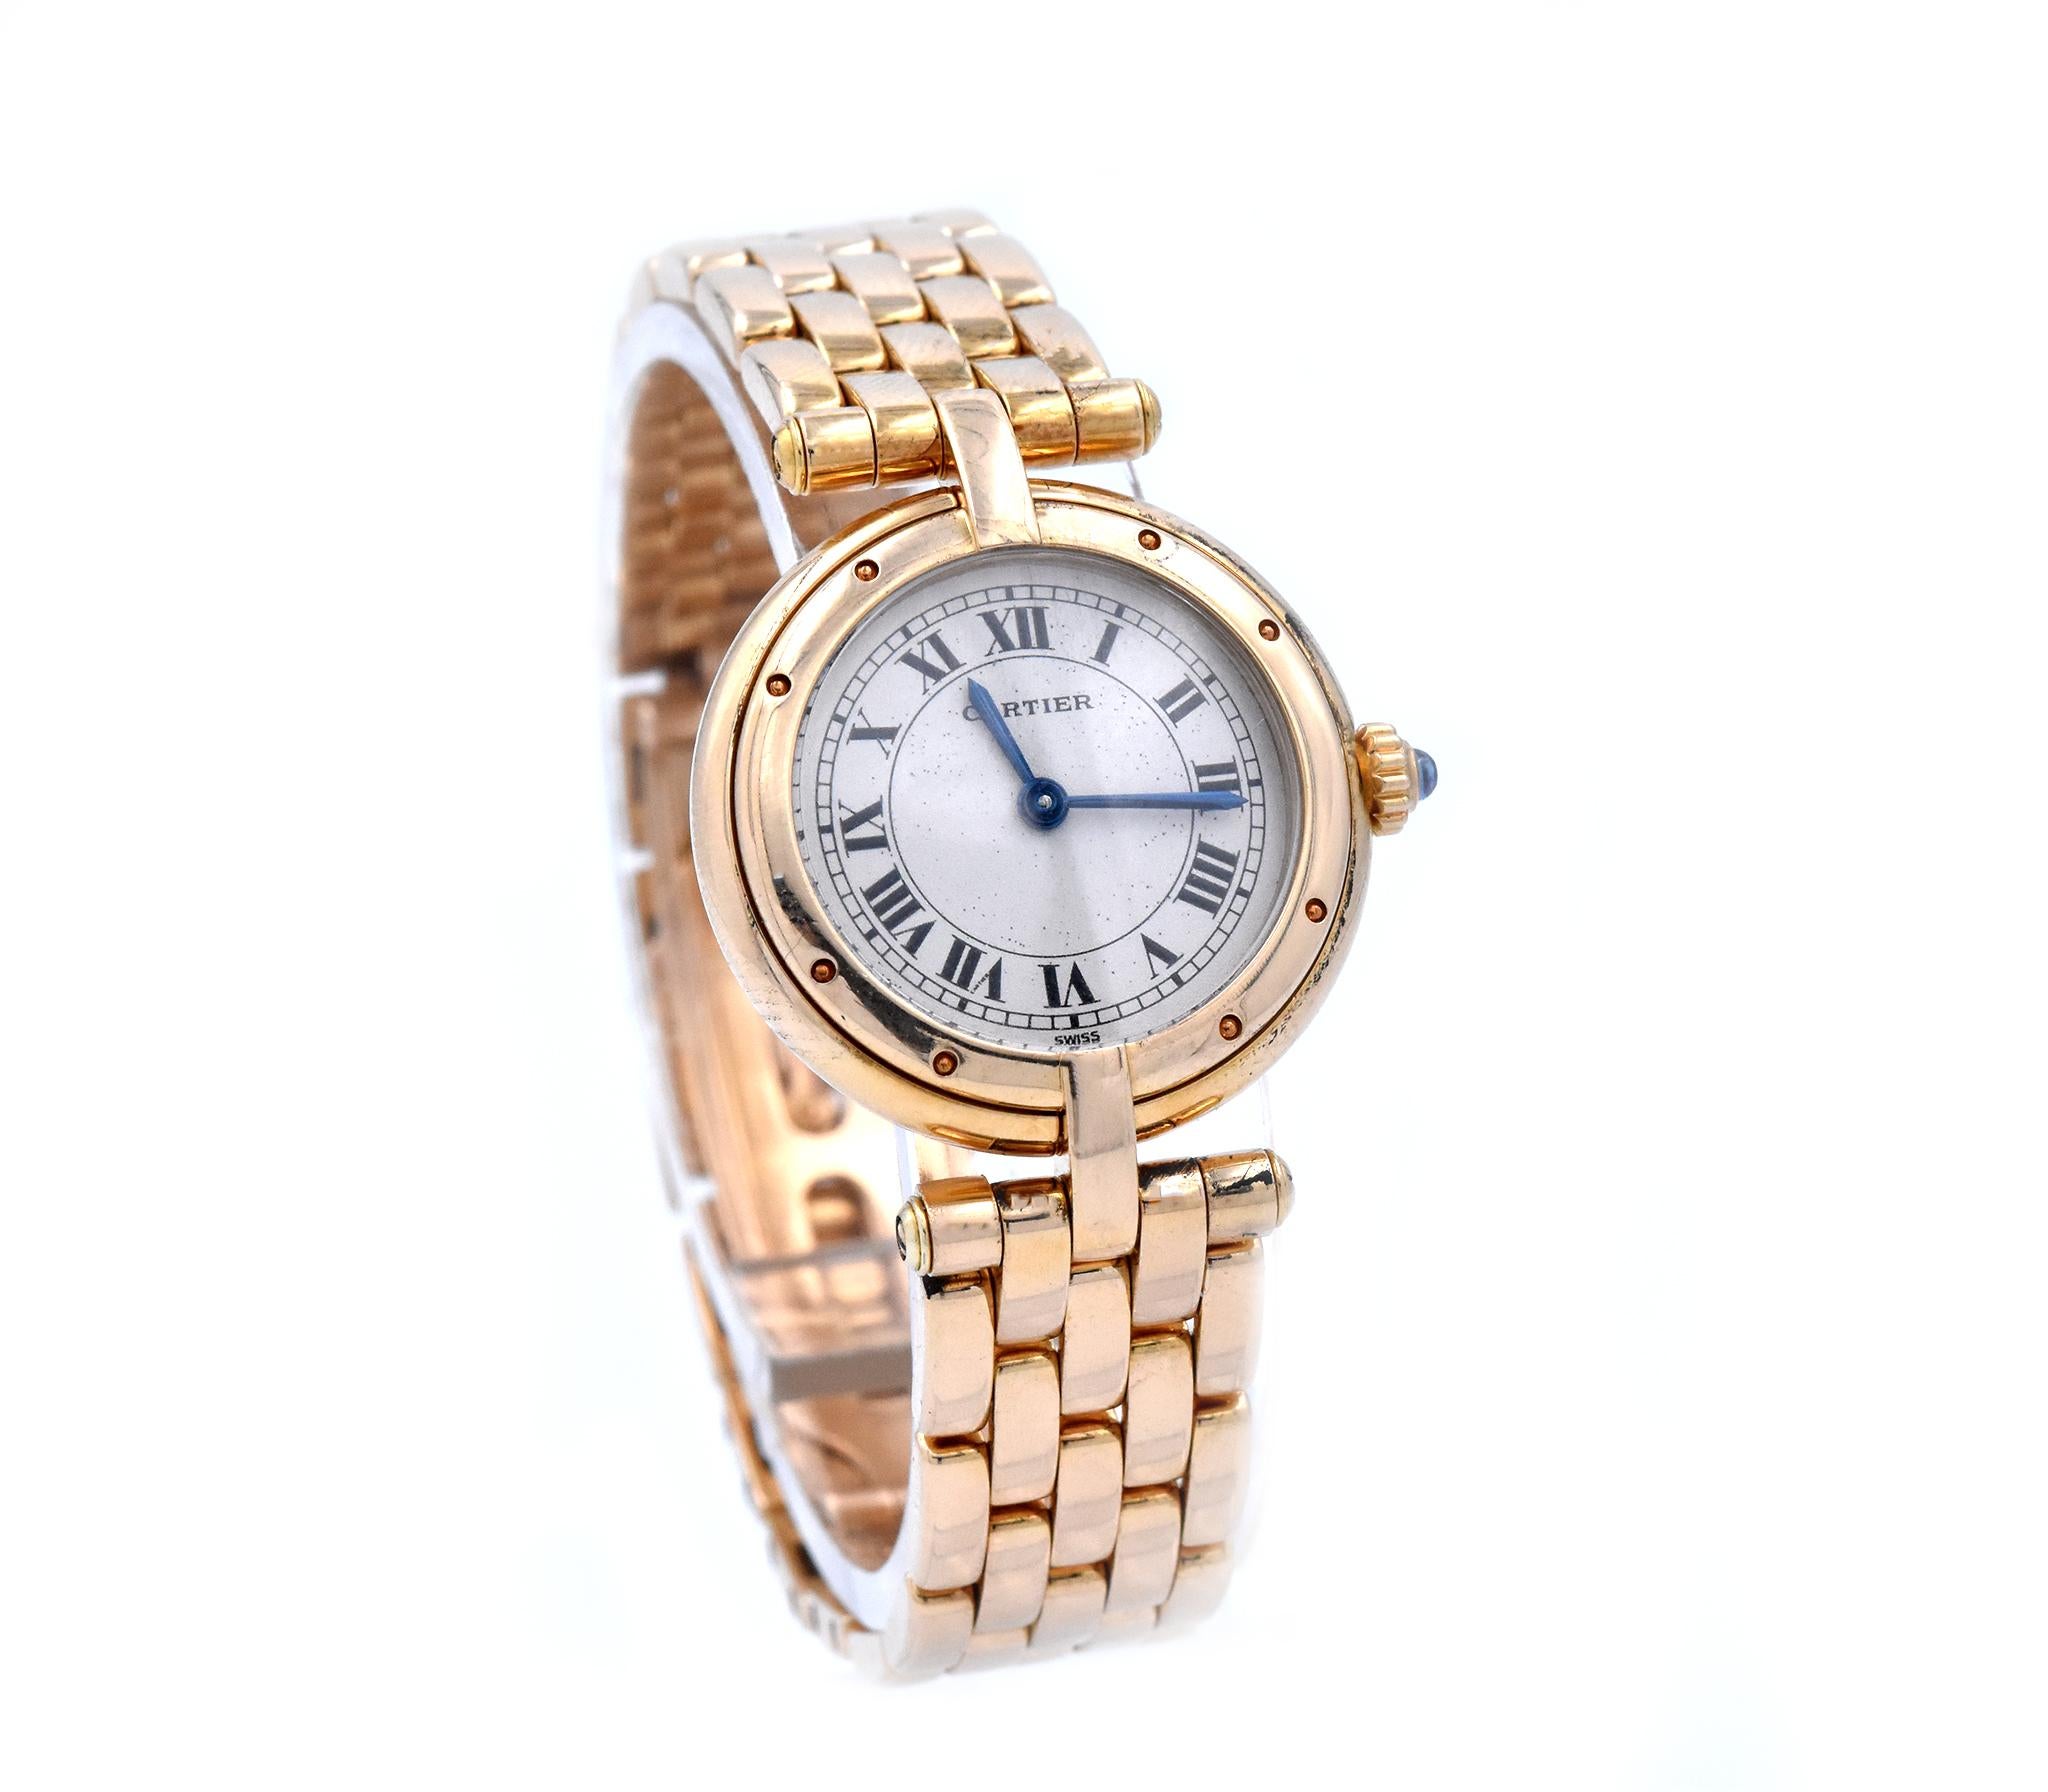 Movement: quartz
Function: hours, minutes
Case: 23.5mm circular case, push pull crown, sapphire crystal
Dial: white dial, blue steeled hands, roman numeral hour markers
Band: yellow gold Cartier link bracelet with butterfly clasp
Serial #: